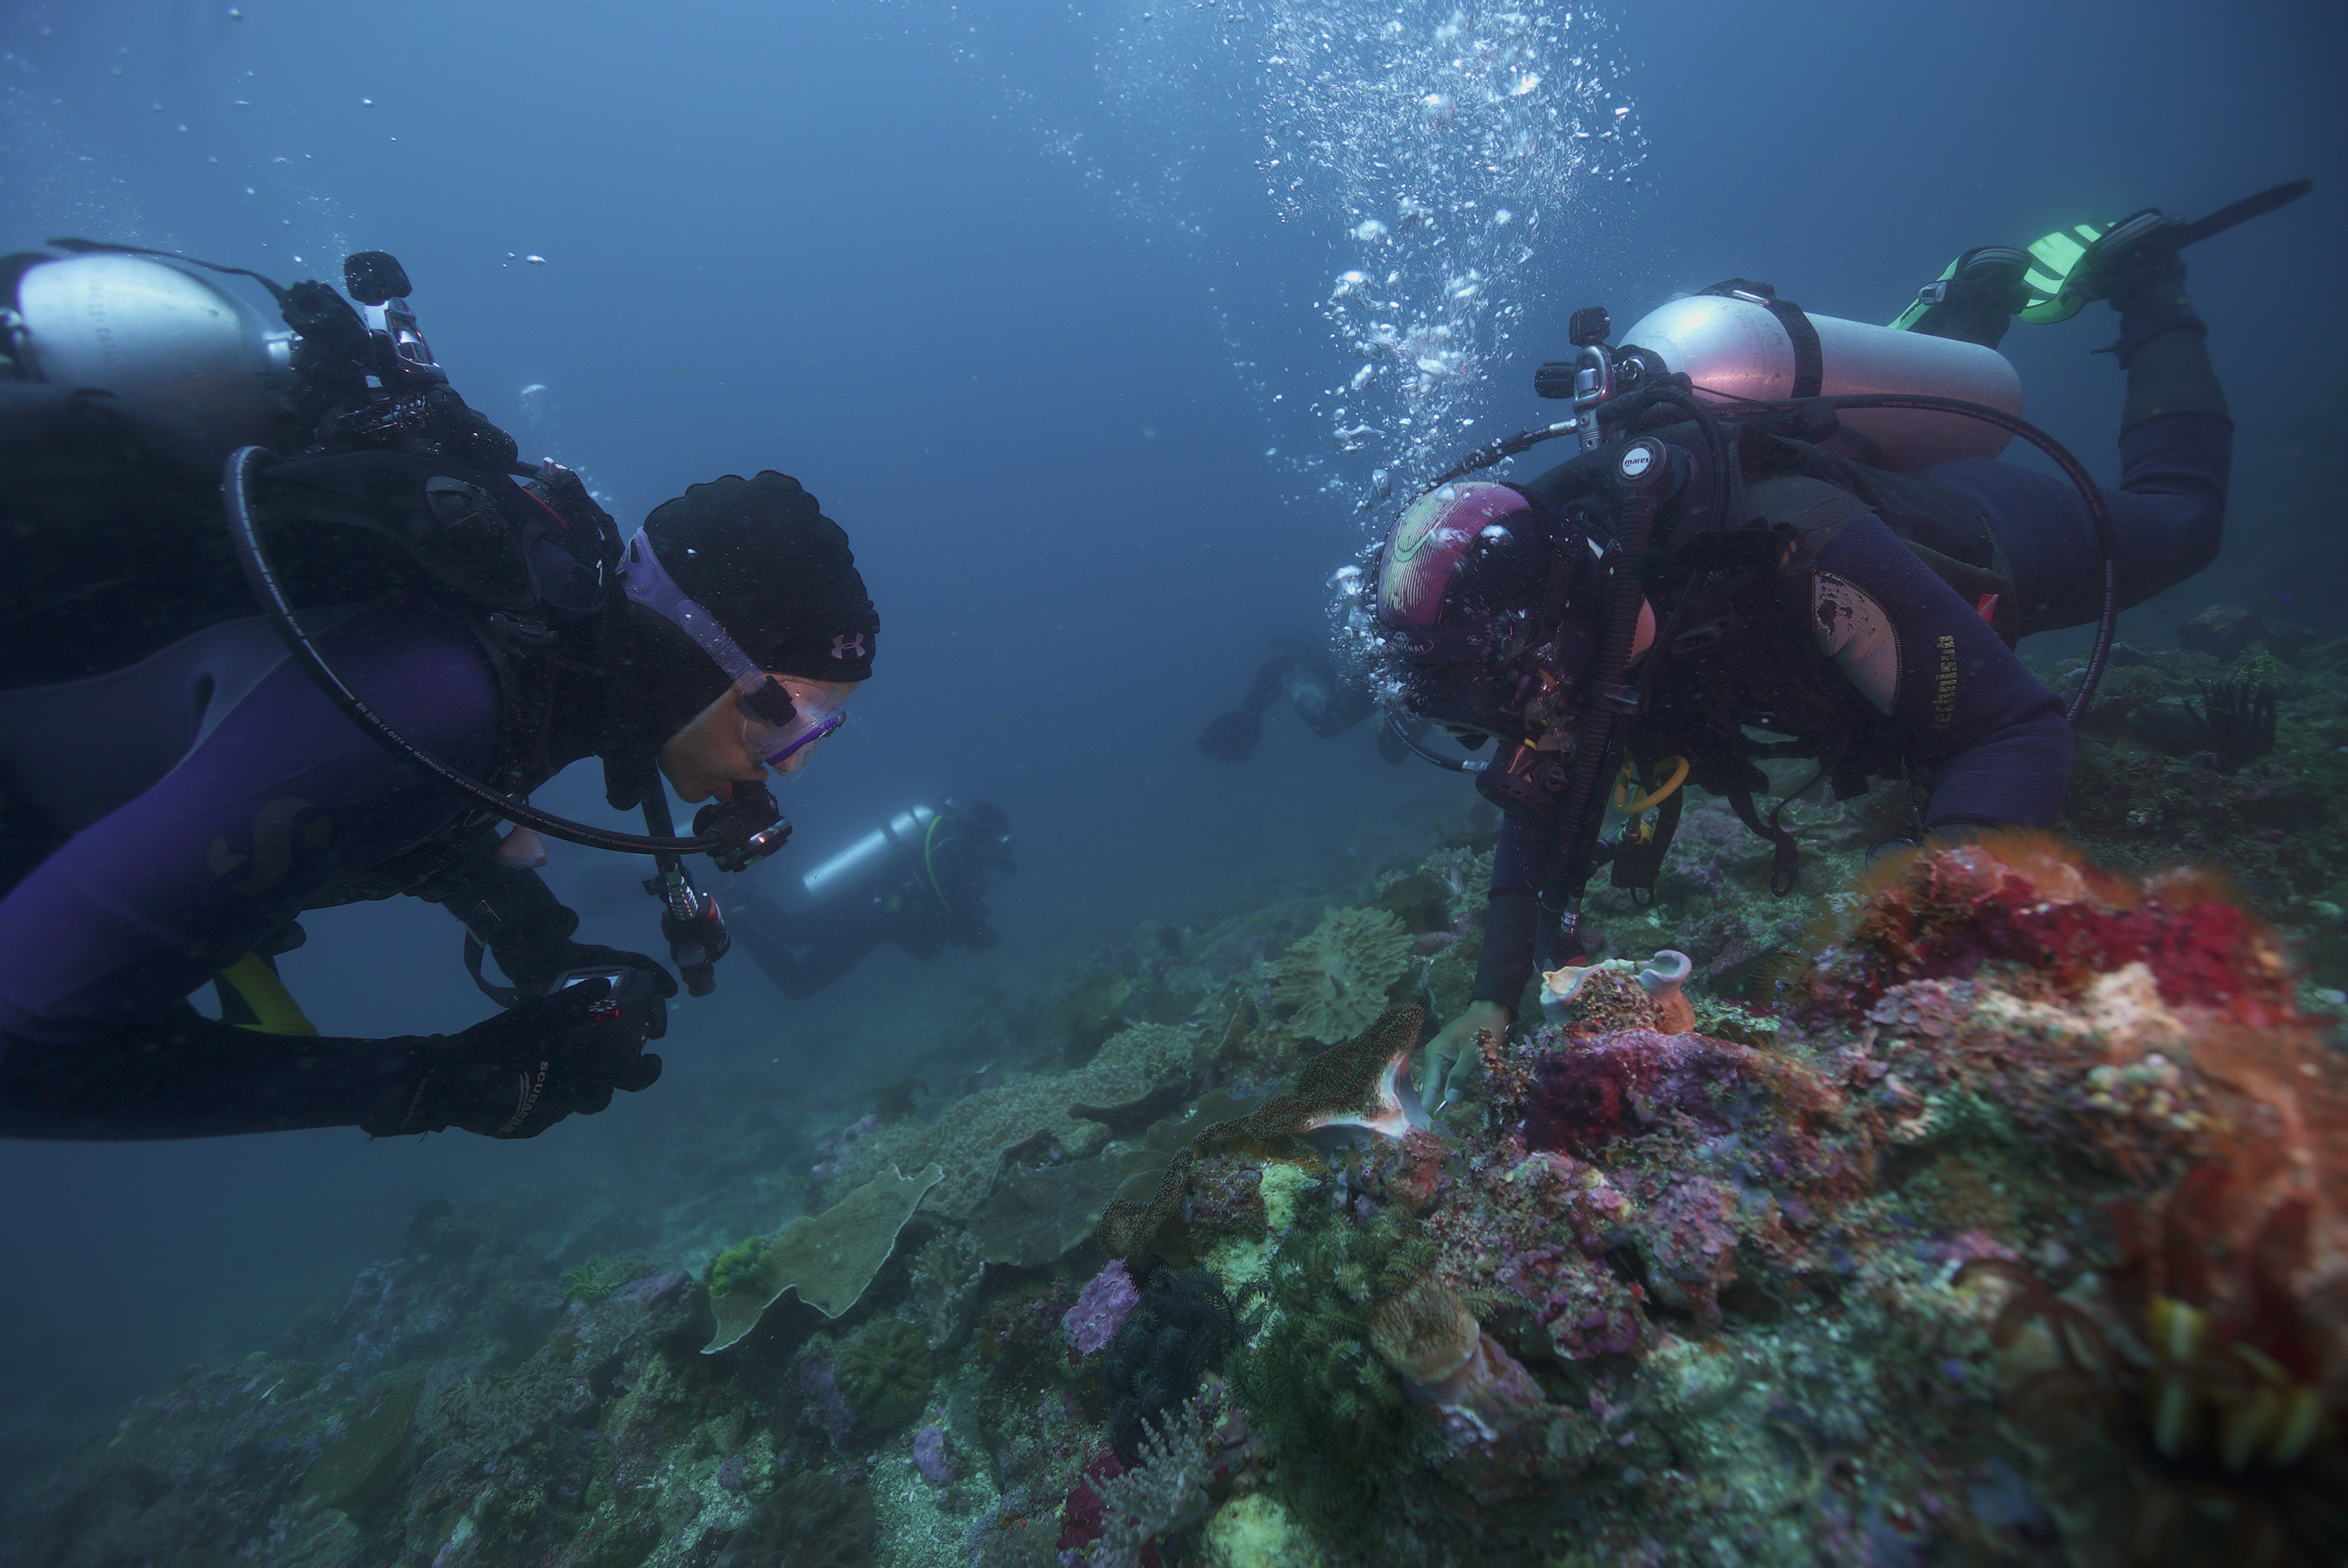 Fisk Johnson, Chairman and CEO of SC Johnson, and M. Sanjayan, CEO of Conservation International, dive among the rich coral reef ecosystems near Bali, Indonesia.